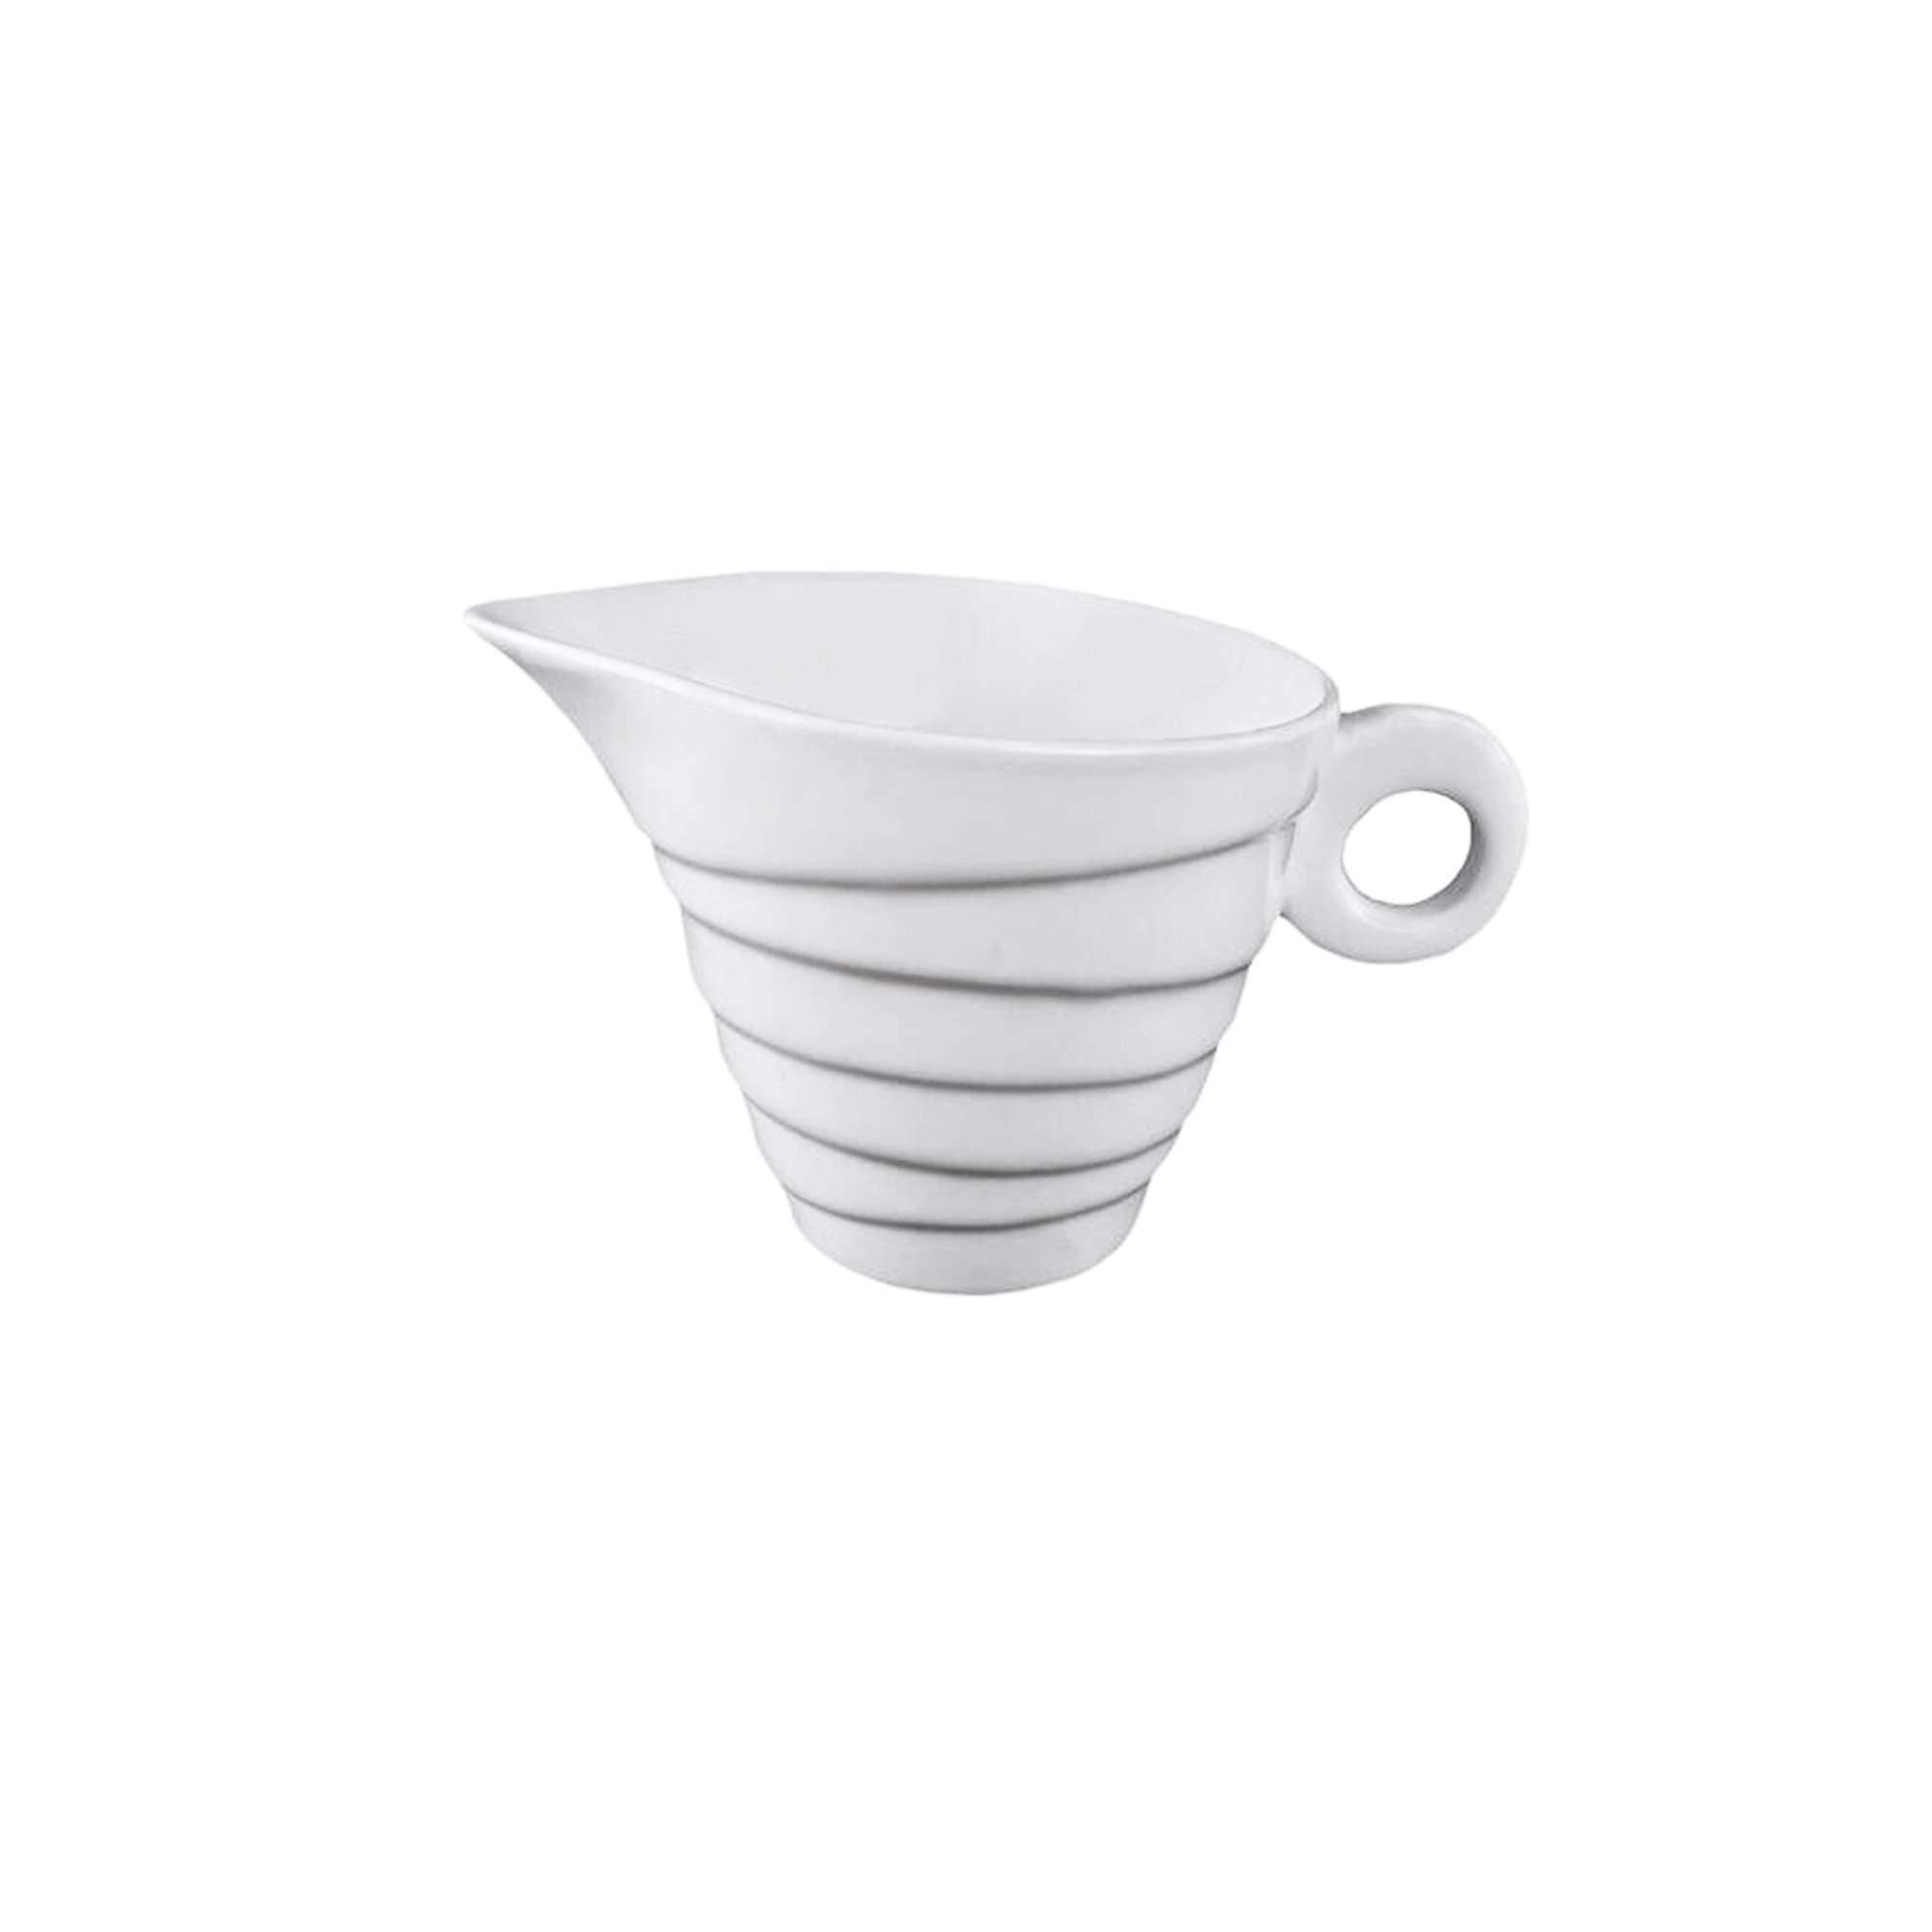 Spinning Collection 160 ml Porcelain Creamer